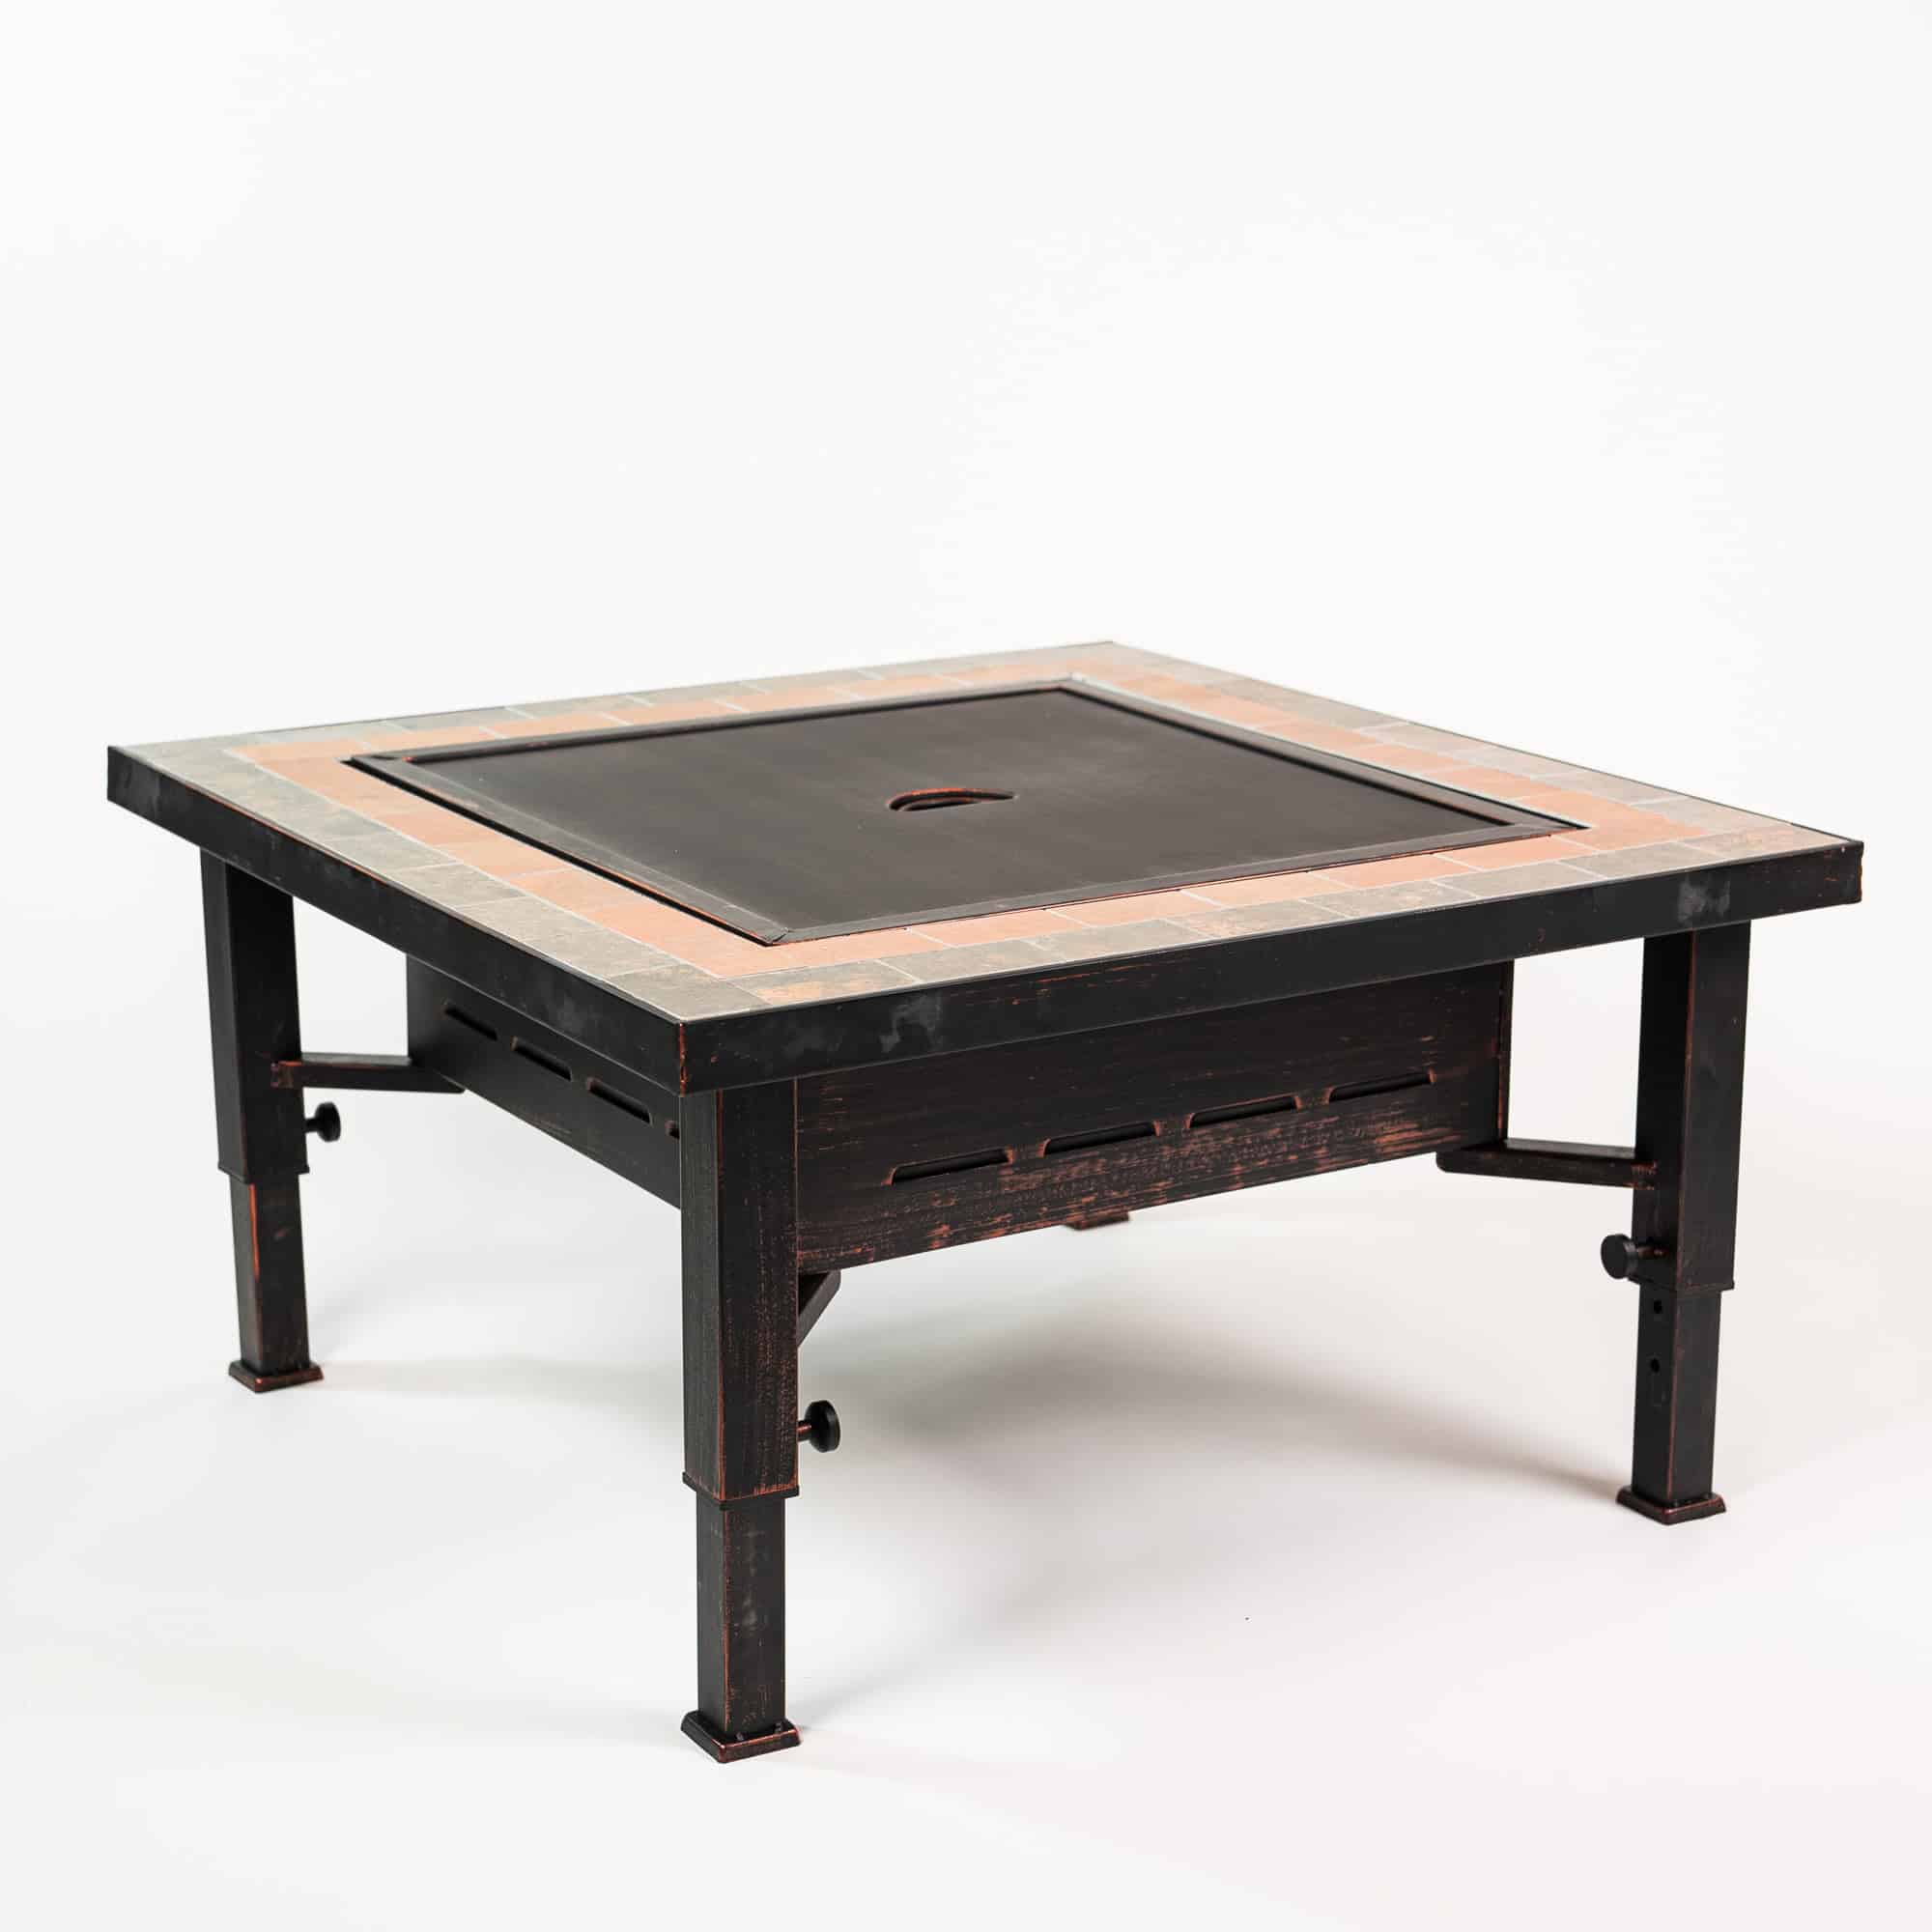 Accommodo Fire Table Lid